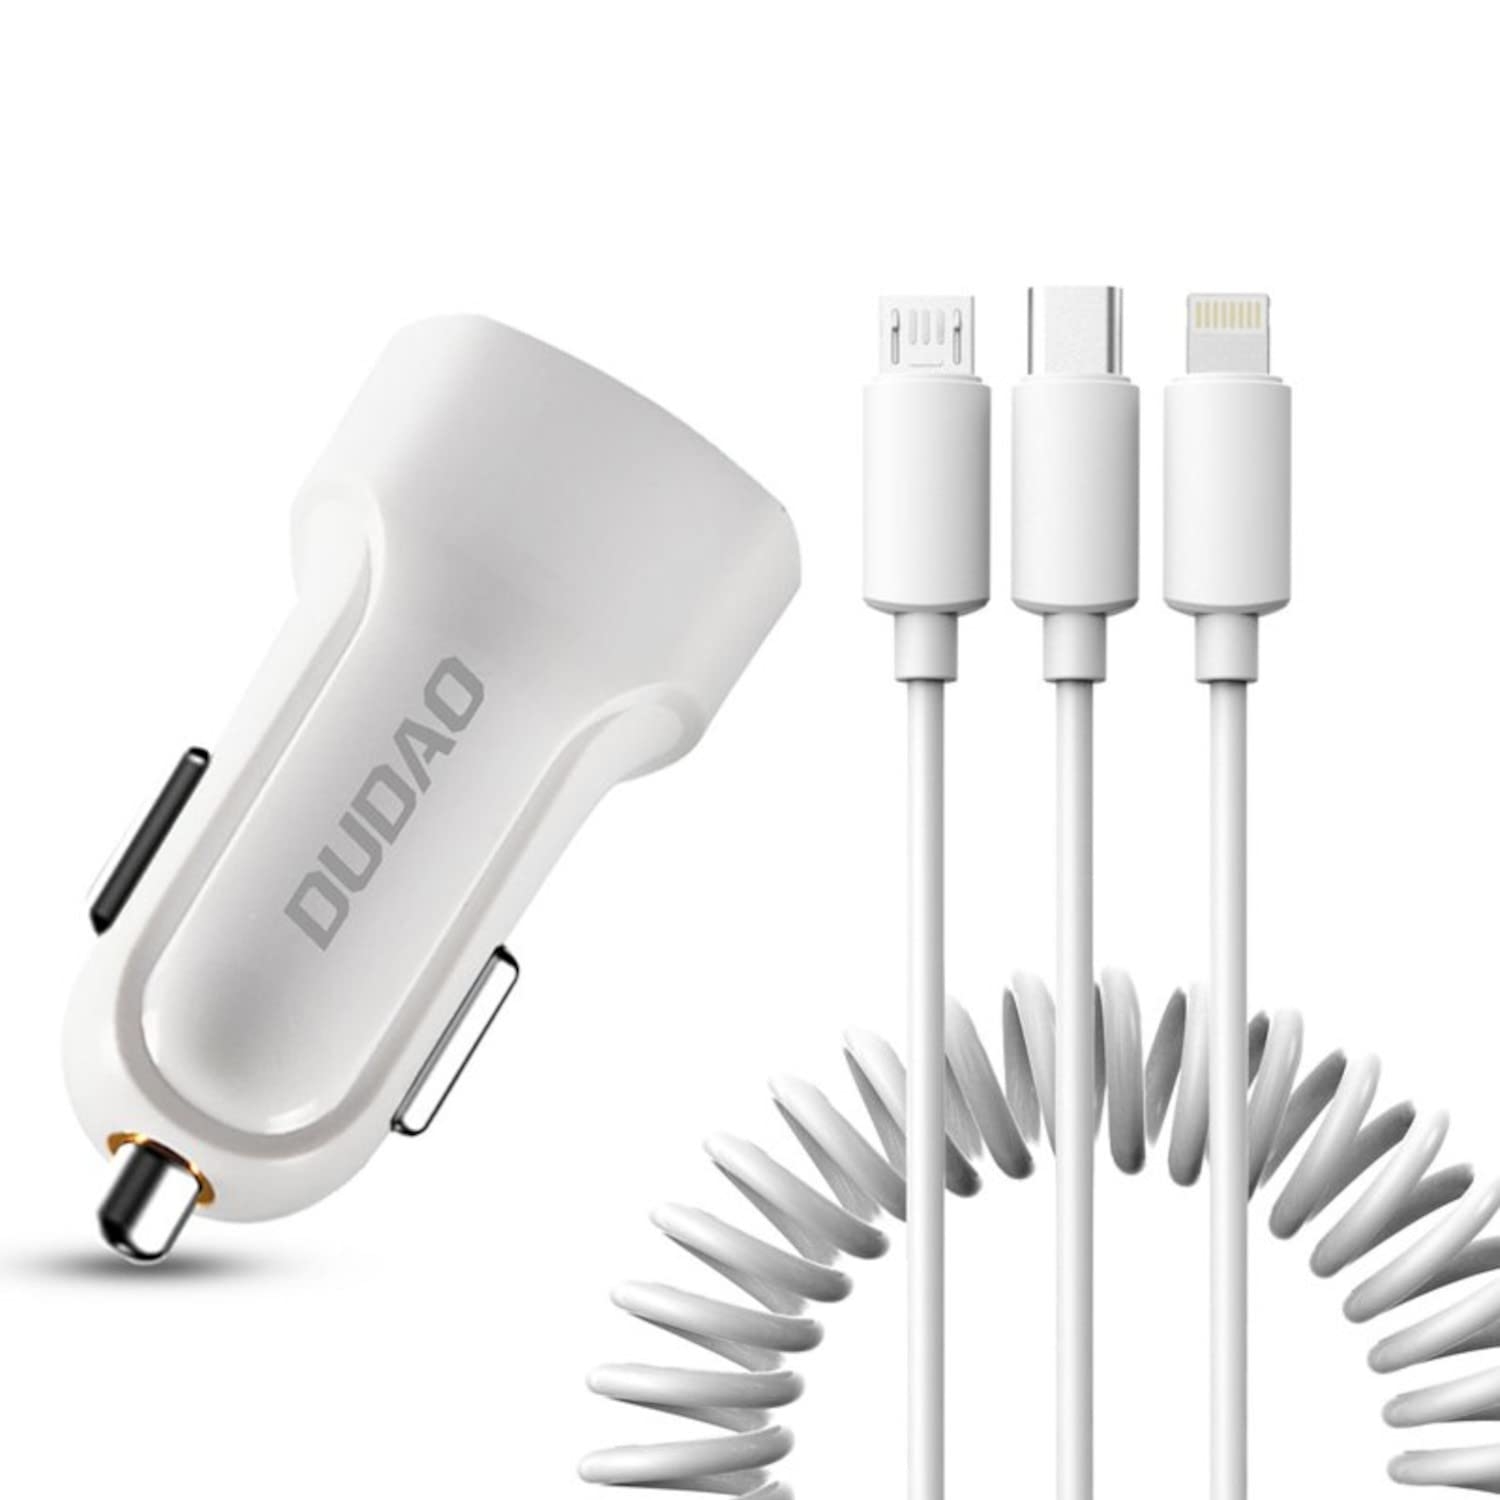 DUDAO R7 Quick 3A Car Charger with 3 in 1 stretchable Coil Cable 1.2M | DUAL USB Port Qualcomm 3.0 Adapter for iPhone